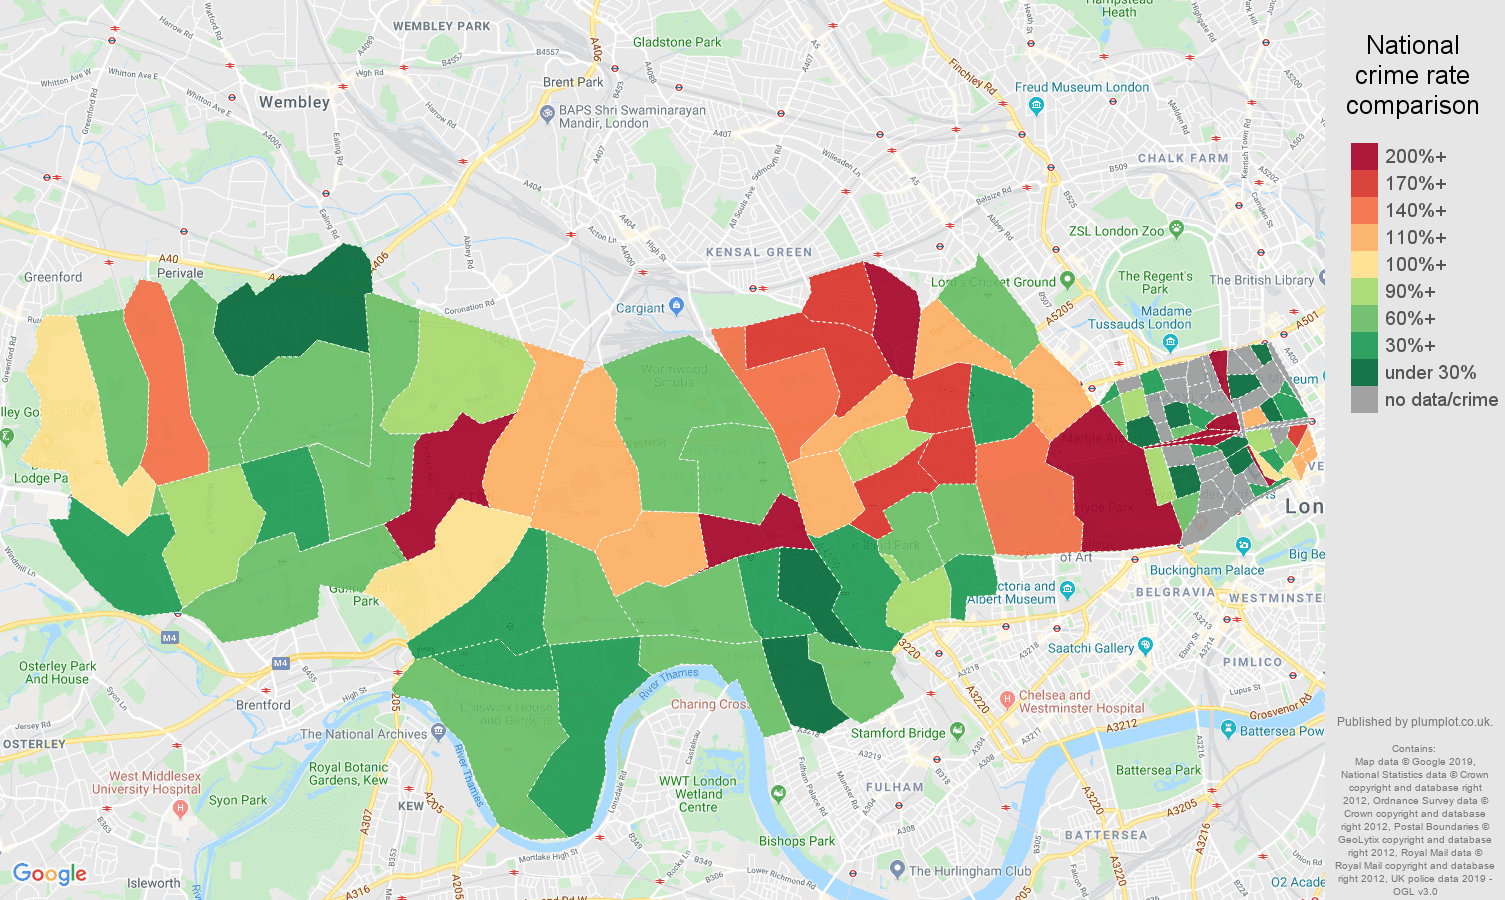 West London possession of weapons crime rate comparison map